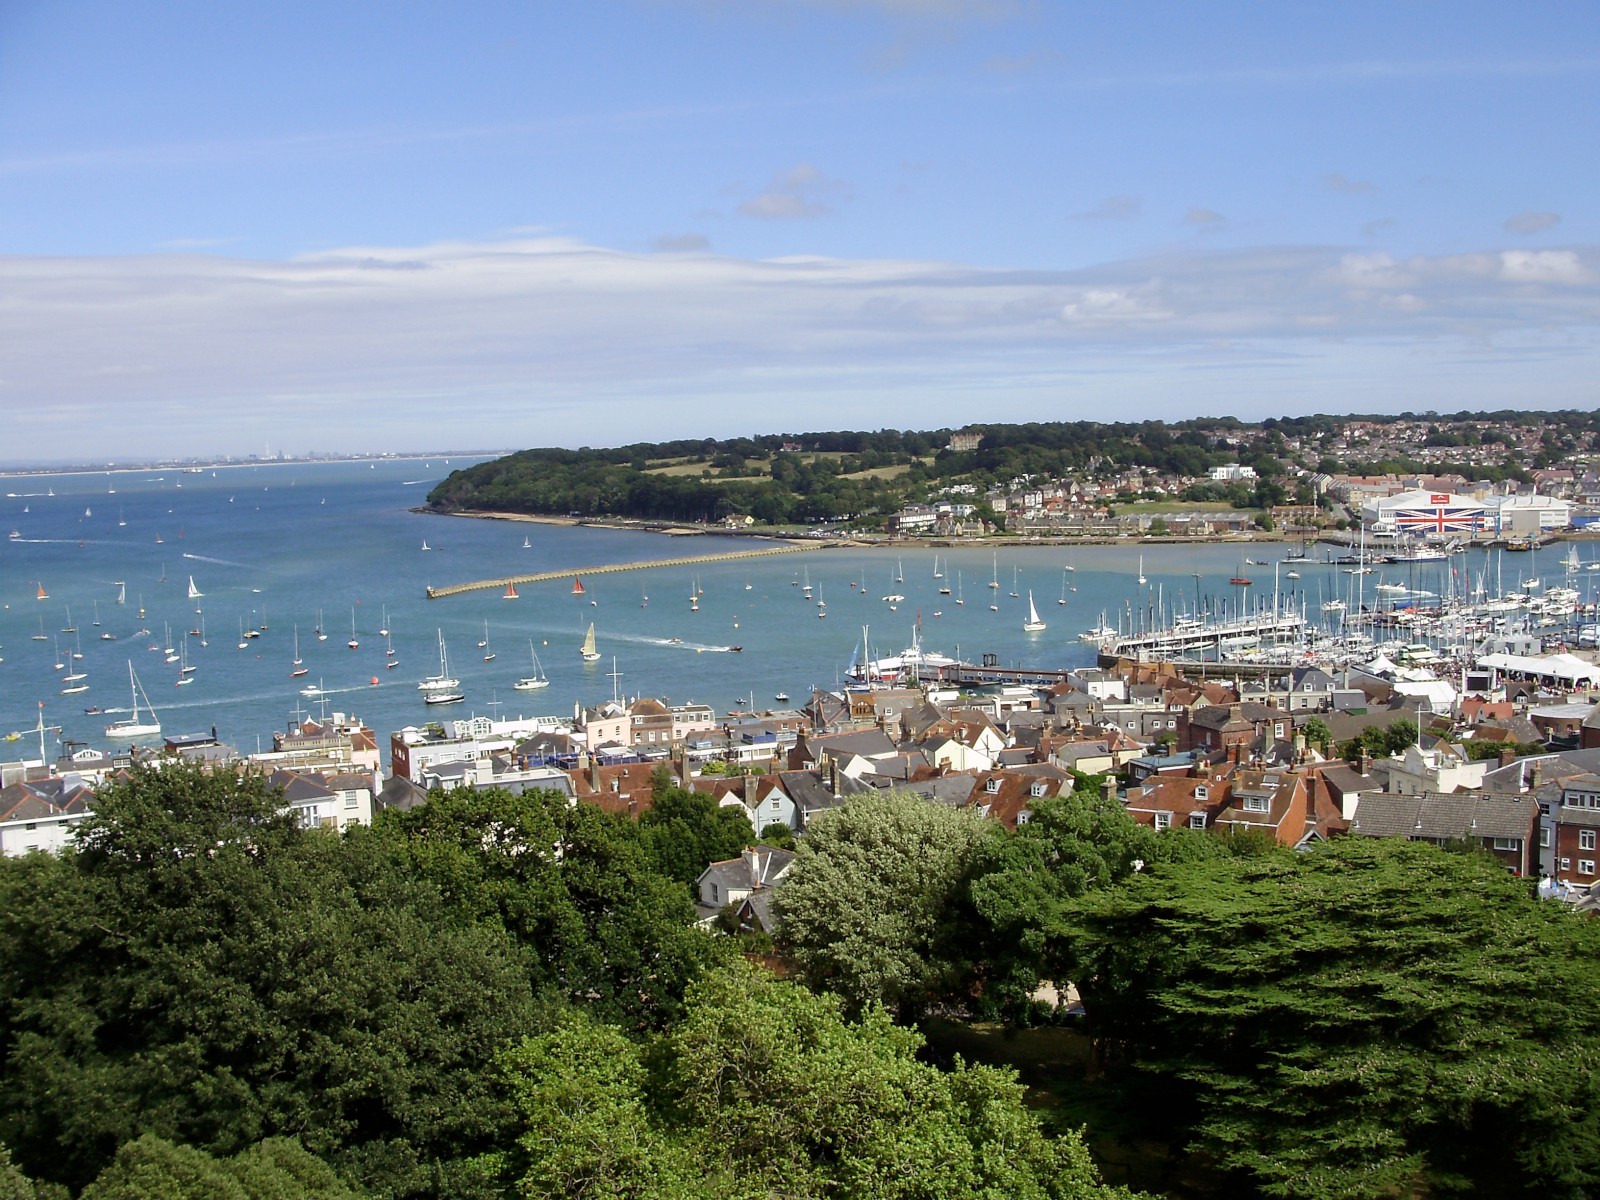 Photograph of Cowes and East Cowes